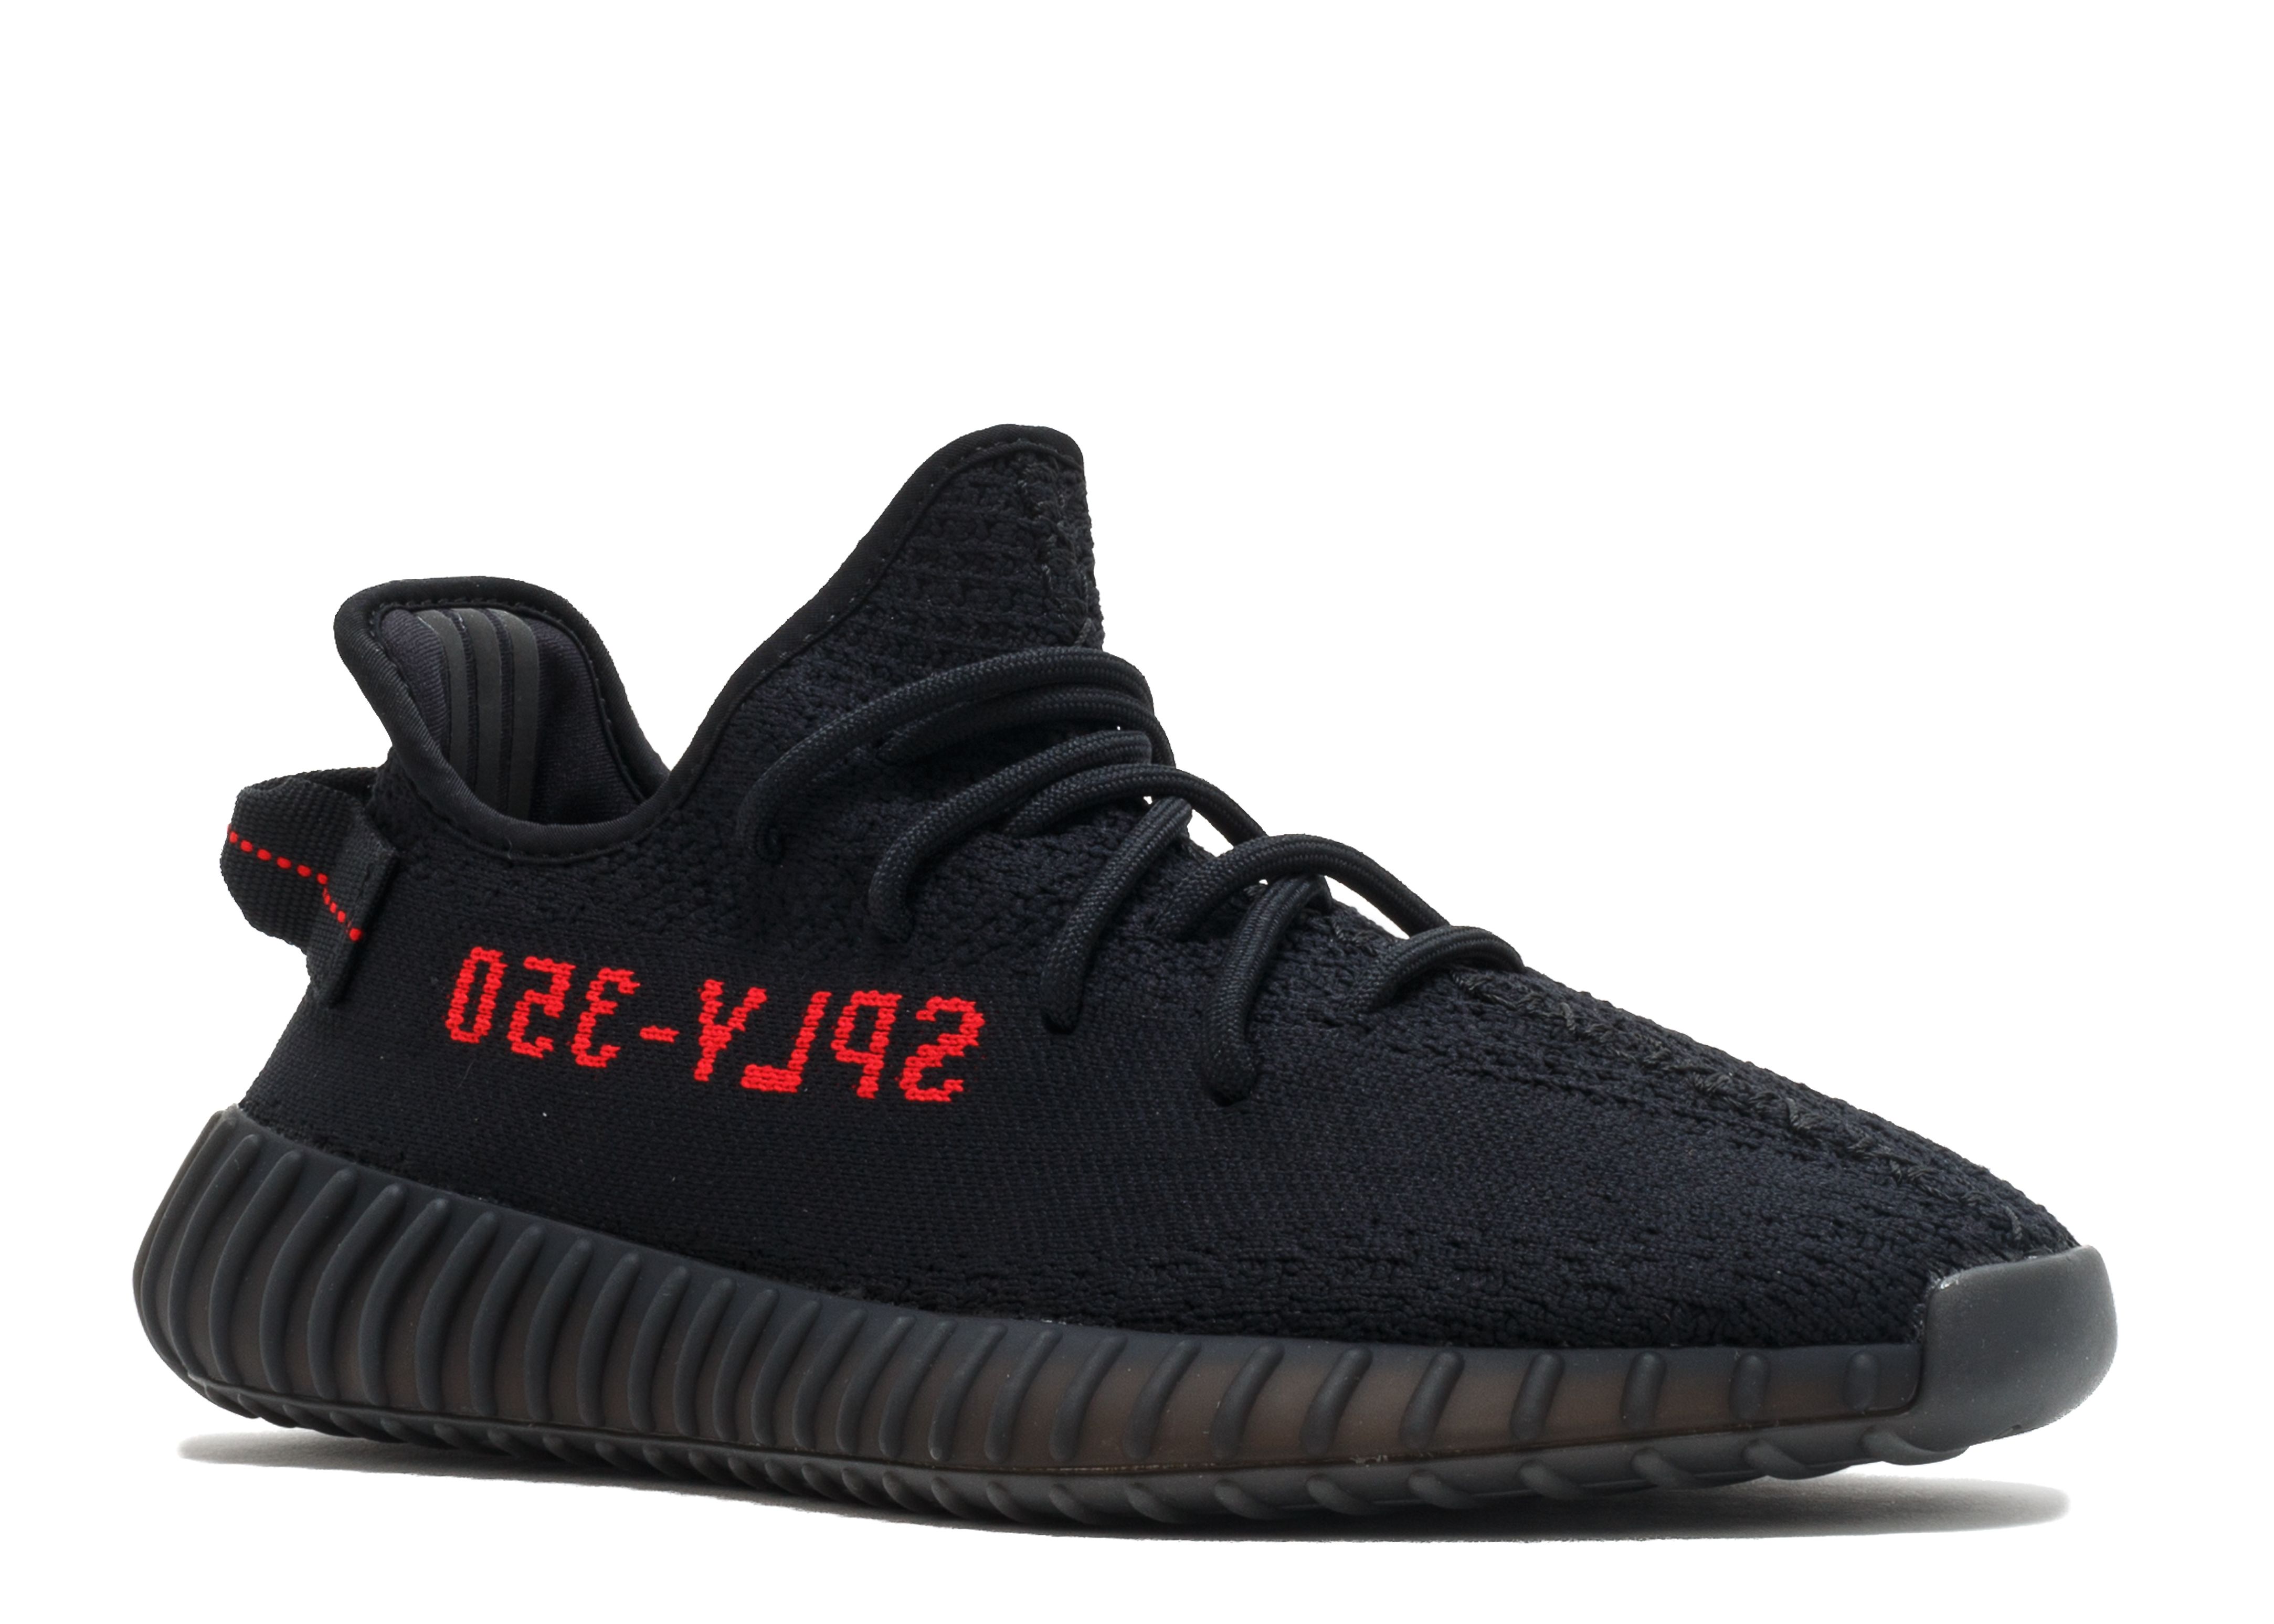 Authentic Adidas yeezy boost 350 v2 'Black Red' full sizes 59% Off Sale